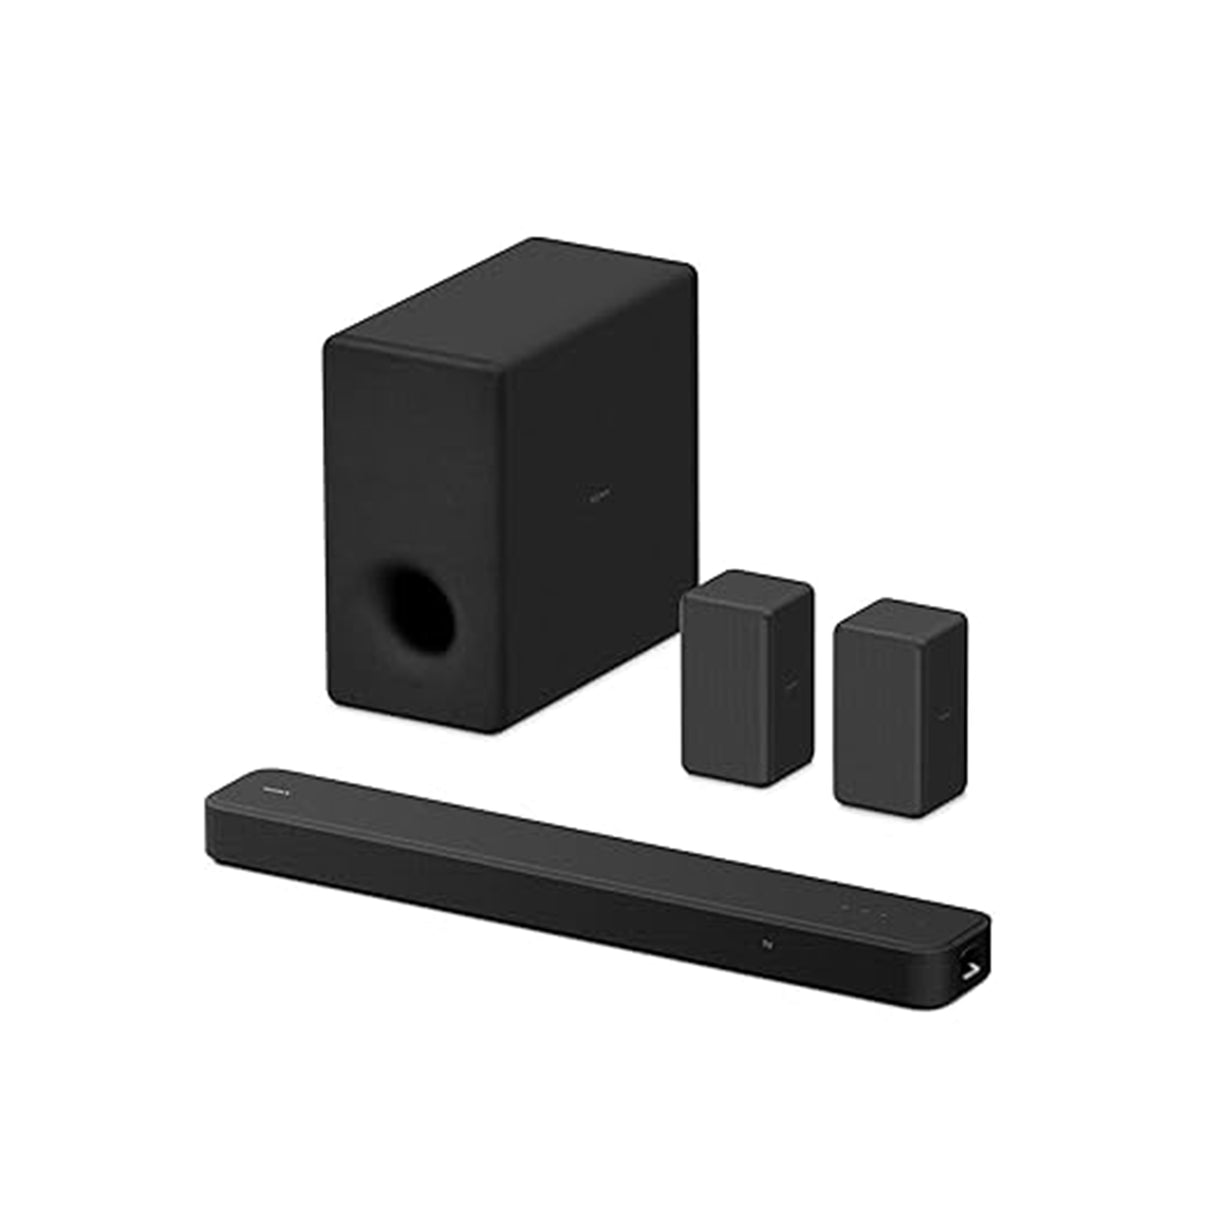 Sony HT-S2000 - 5.1 Channel Dolby Atmos Soundbar with Wireless SA-SW3 Subwoofer + SA-RS3S Wireless Rear Speakers - 5.1 Package